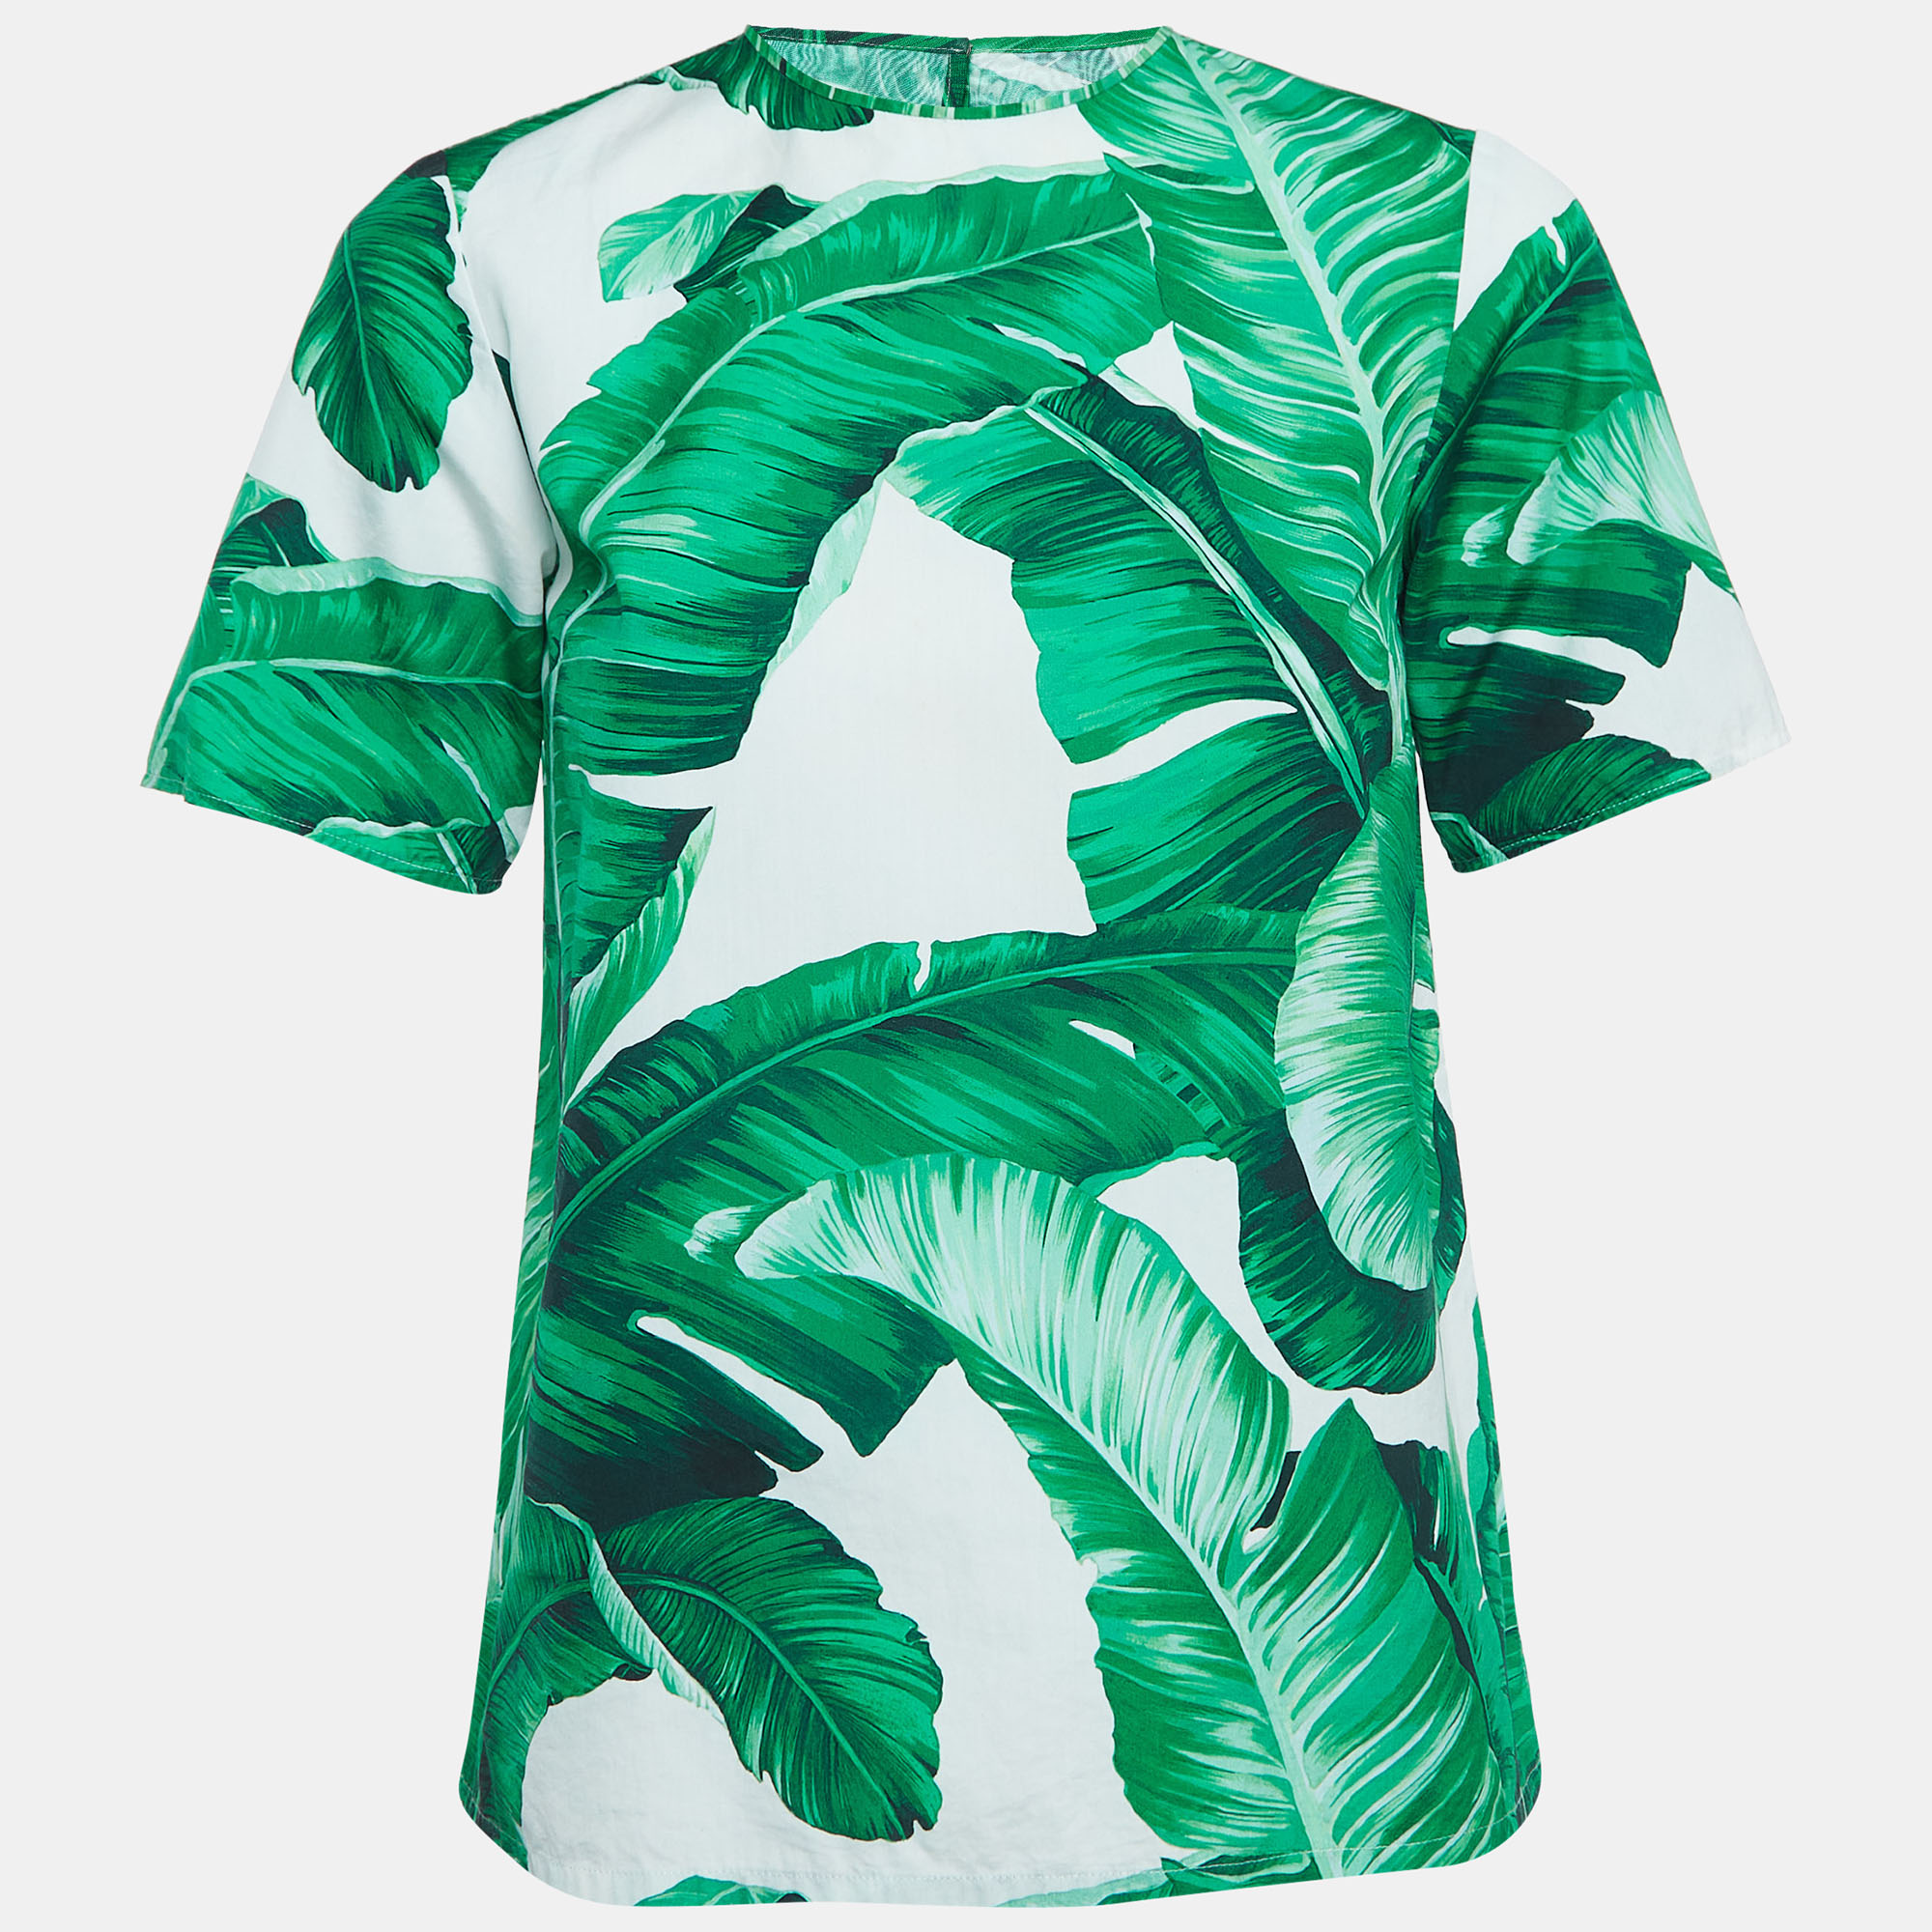 

Dolce and Gabbana Green Leaf Printed Cotton Short Sleeve Top